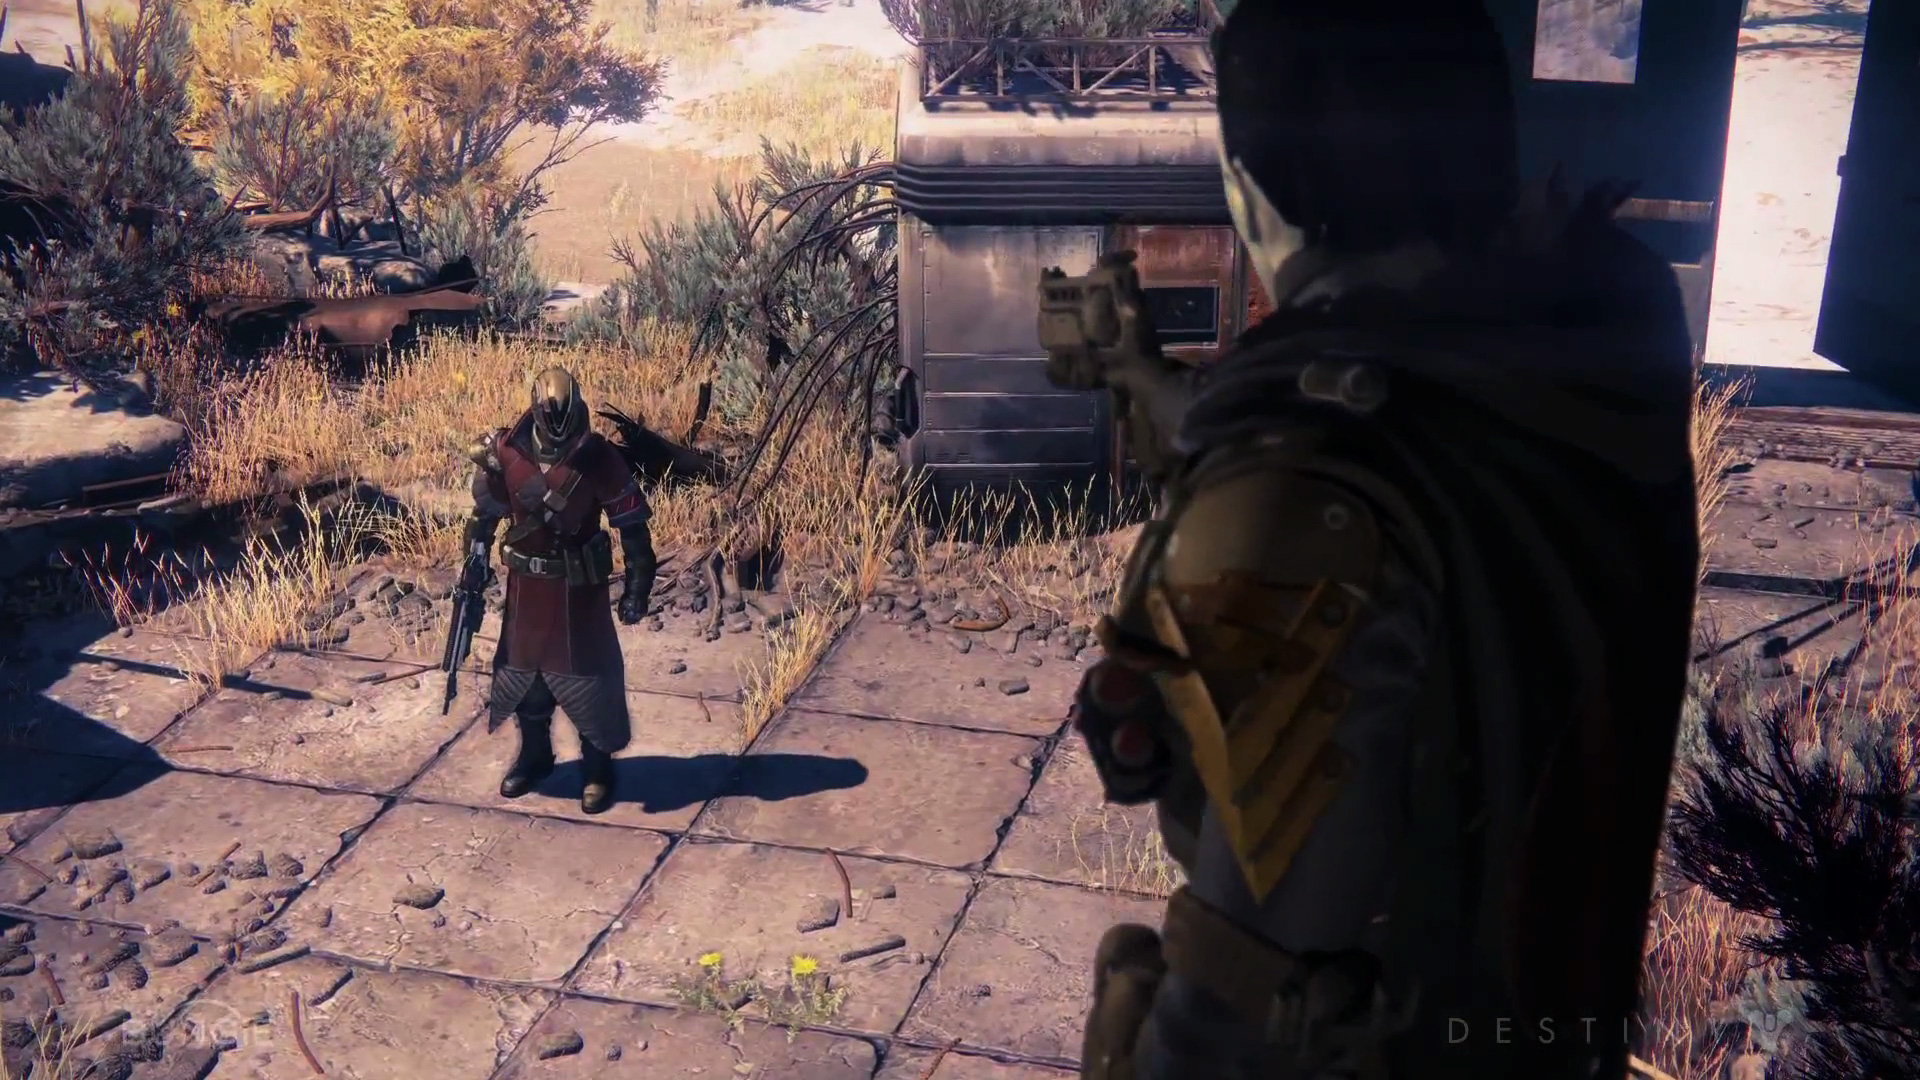 bungies-destiny-12-minutes-of-epic-gameplay-action-10.jpg